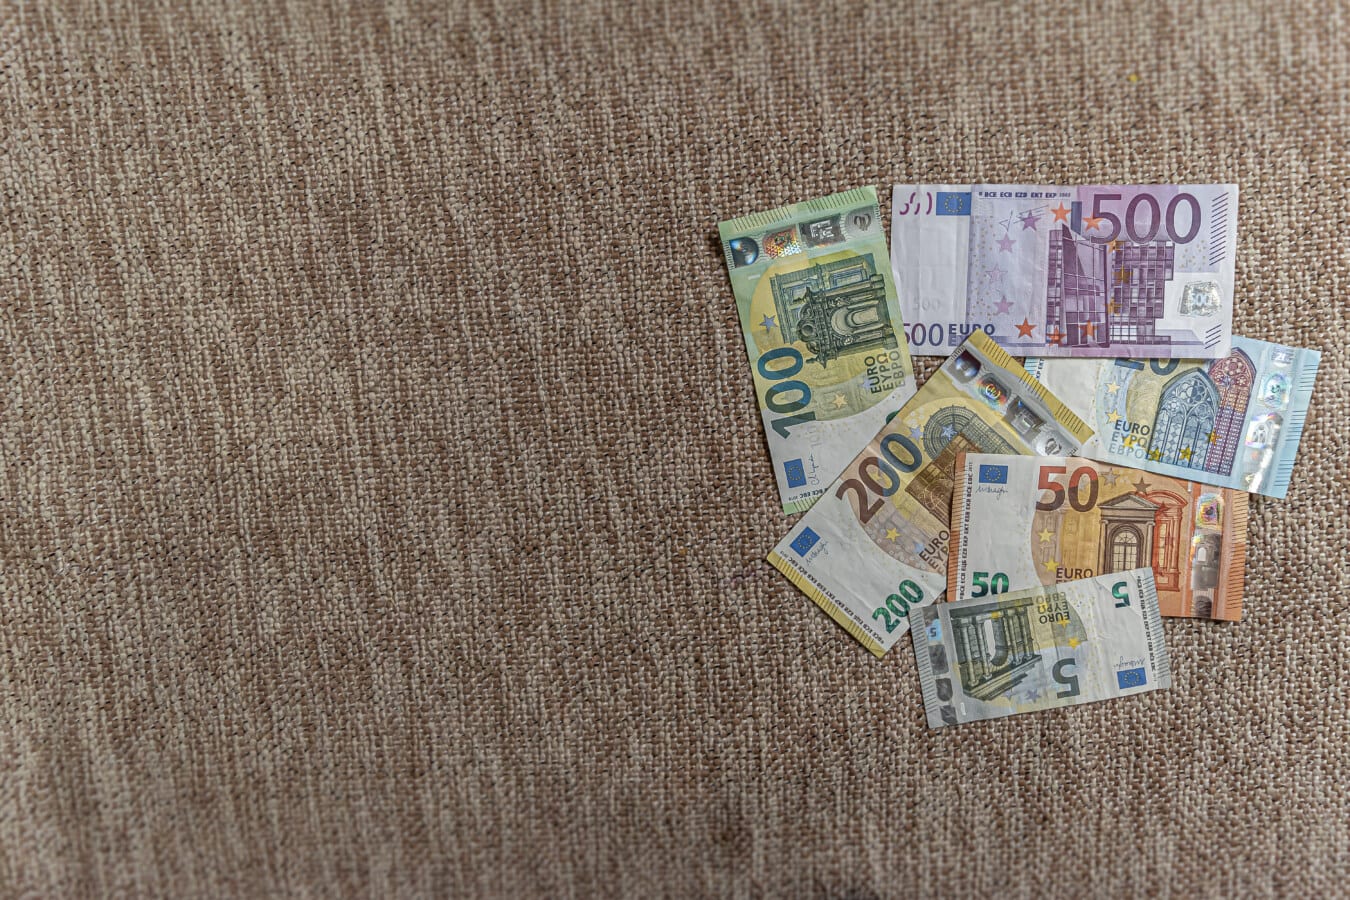 Pile of euro (€) paper banknotes illustrating economy growth